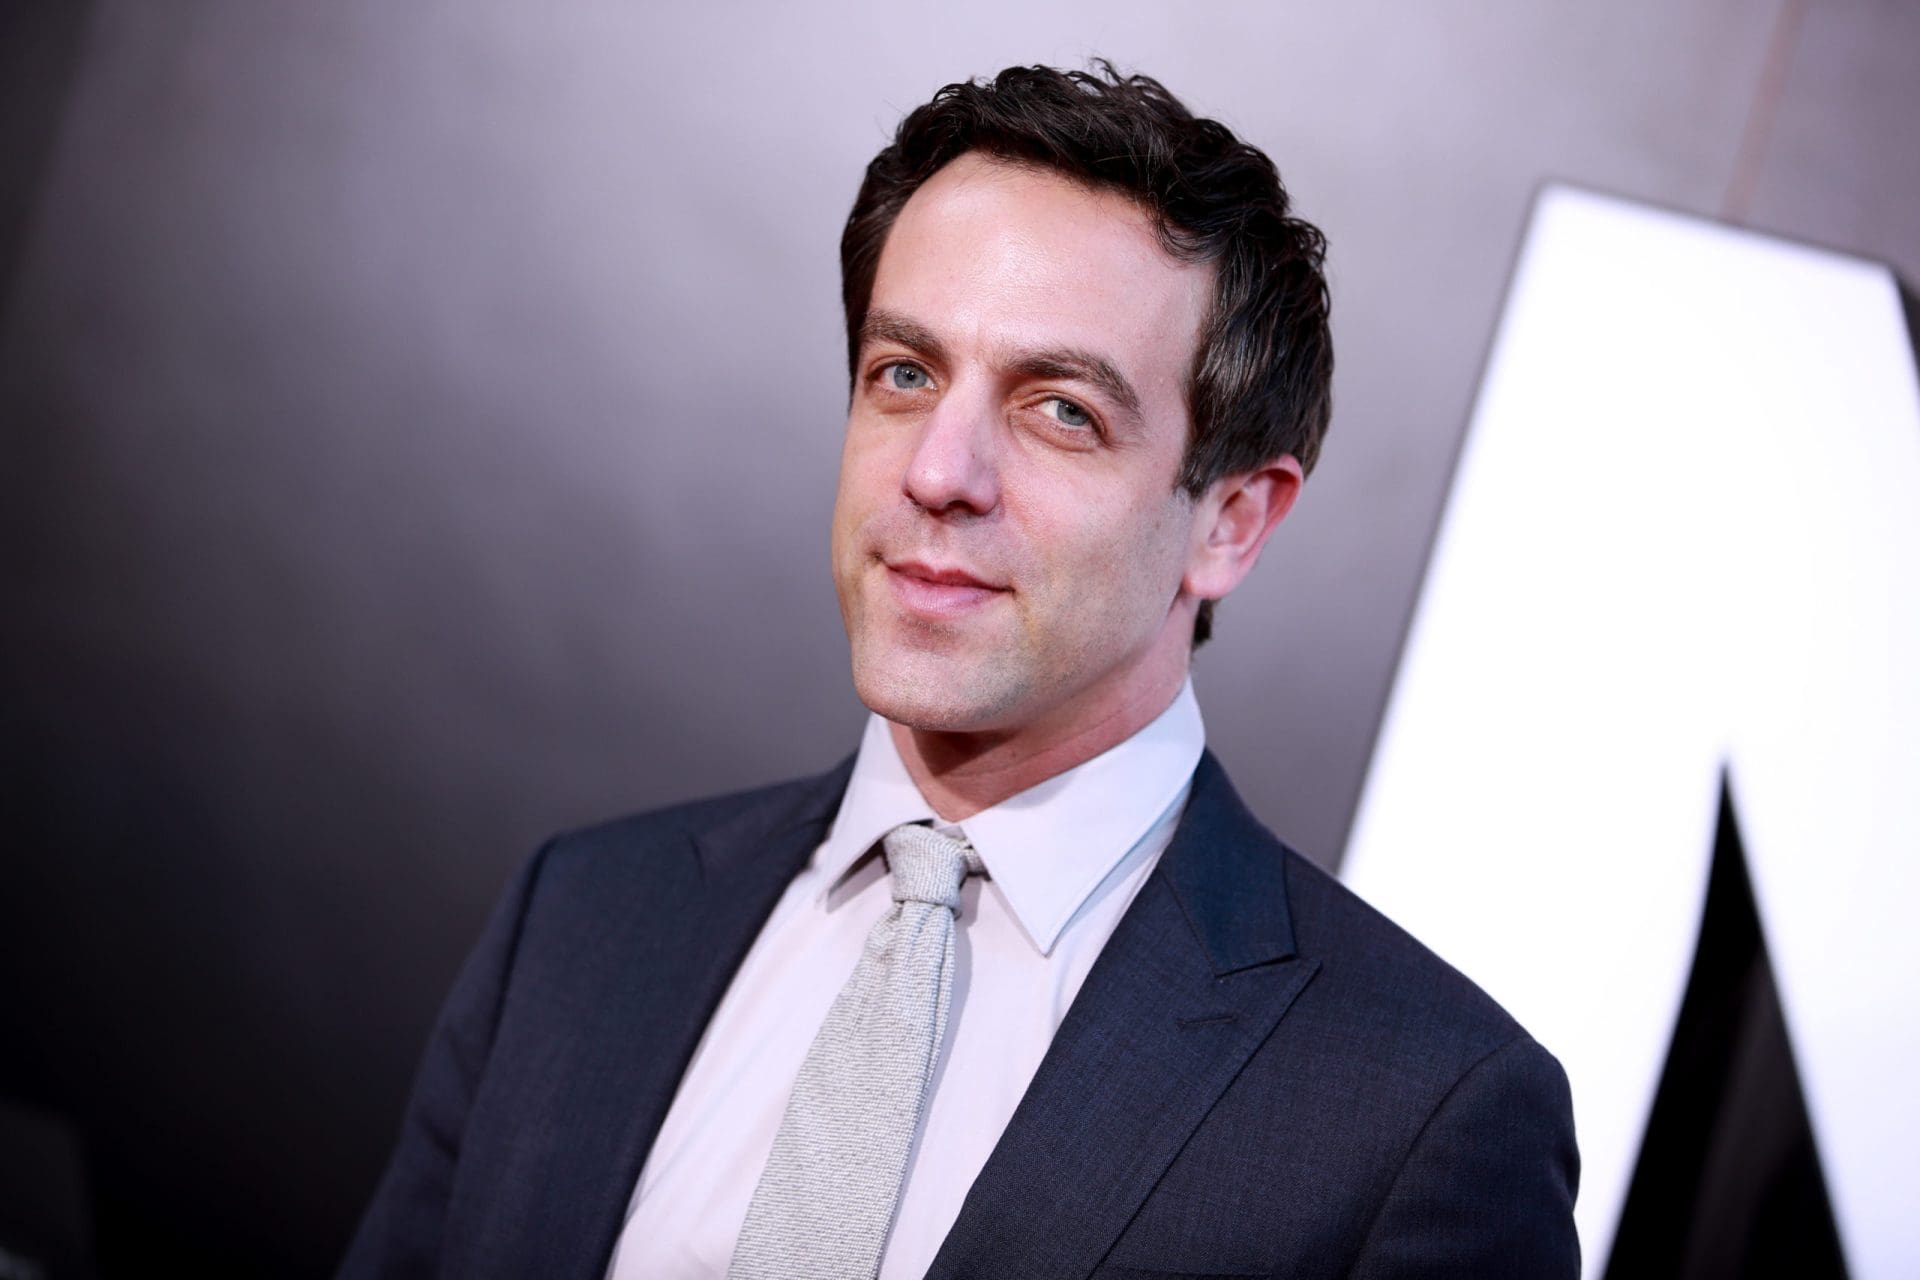 Bj Novak Face On Products